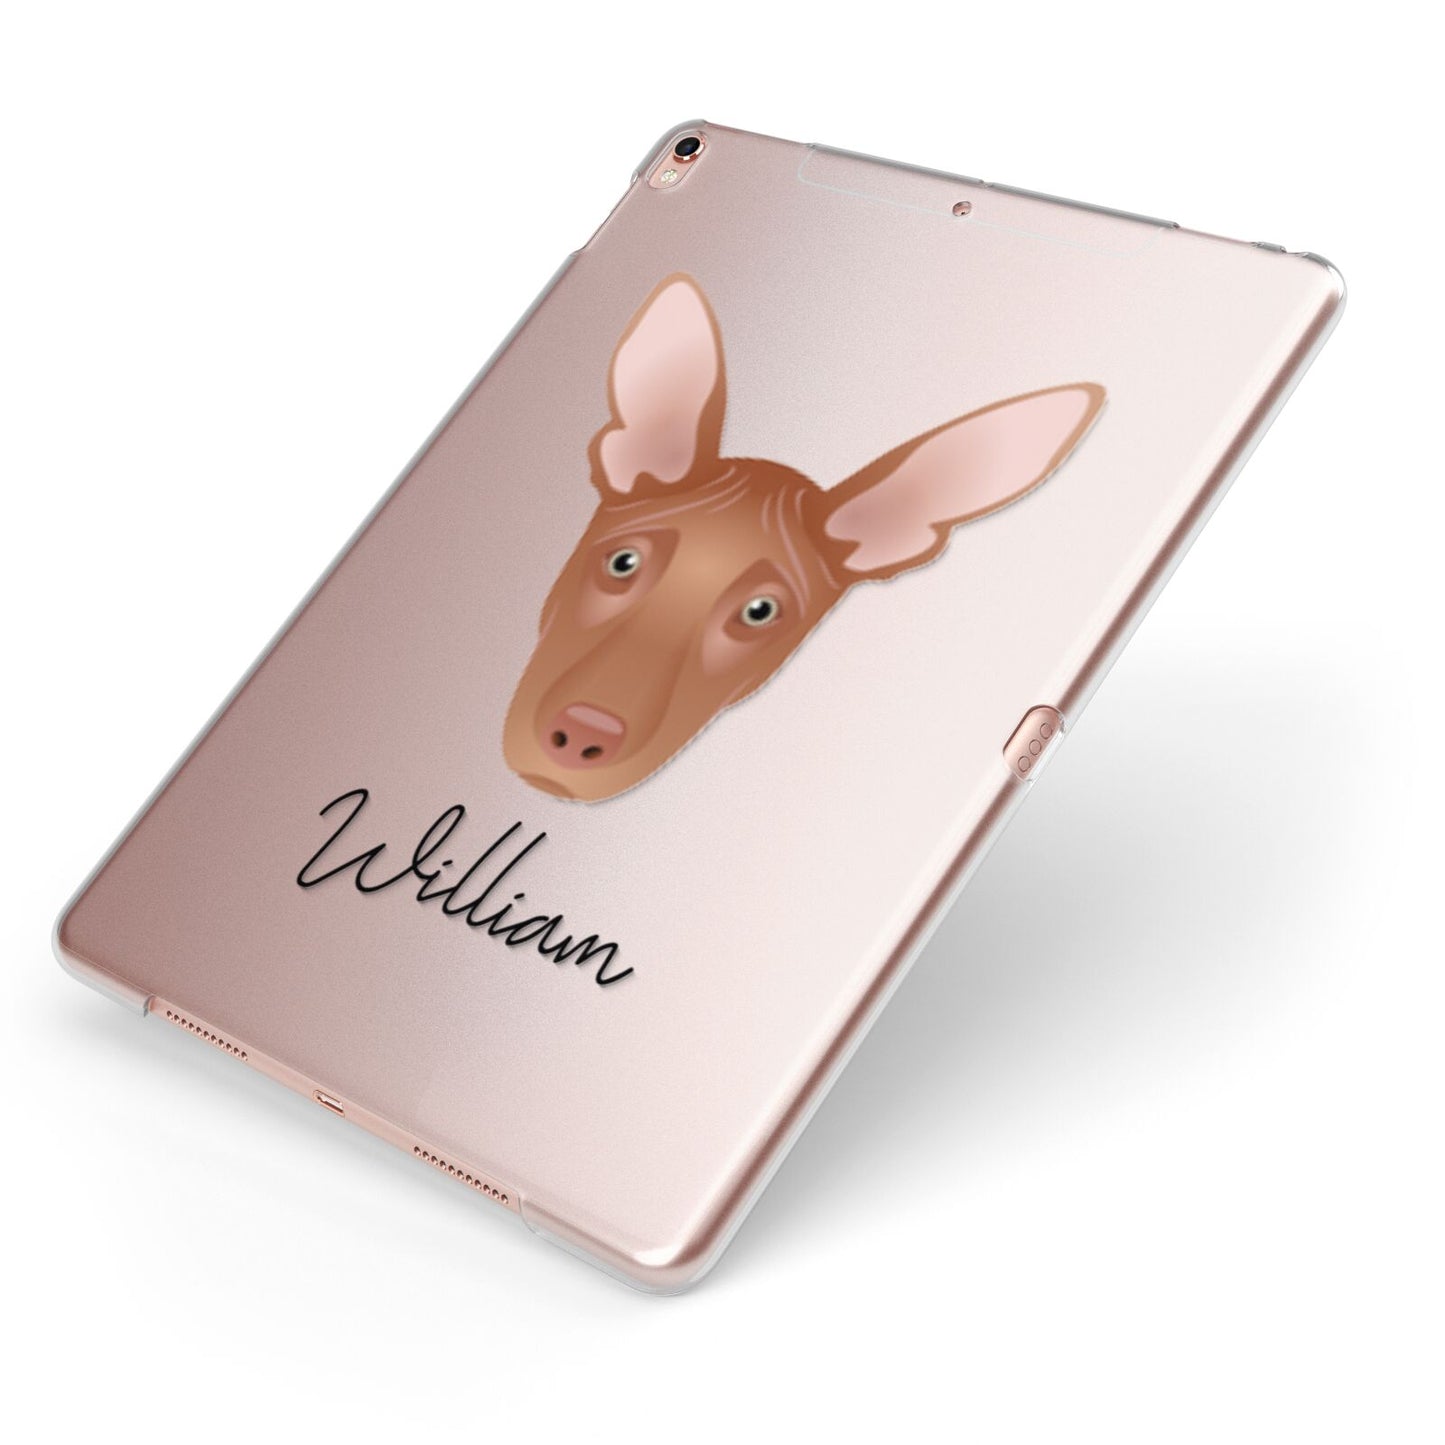 Pharaoh Hound Personalised Apple iPad Case on Rose Gold iPad Side View